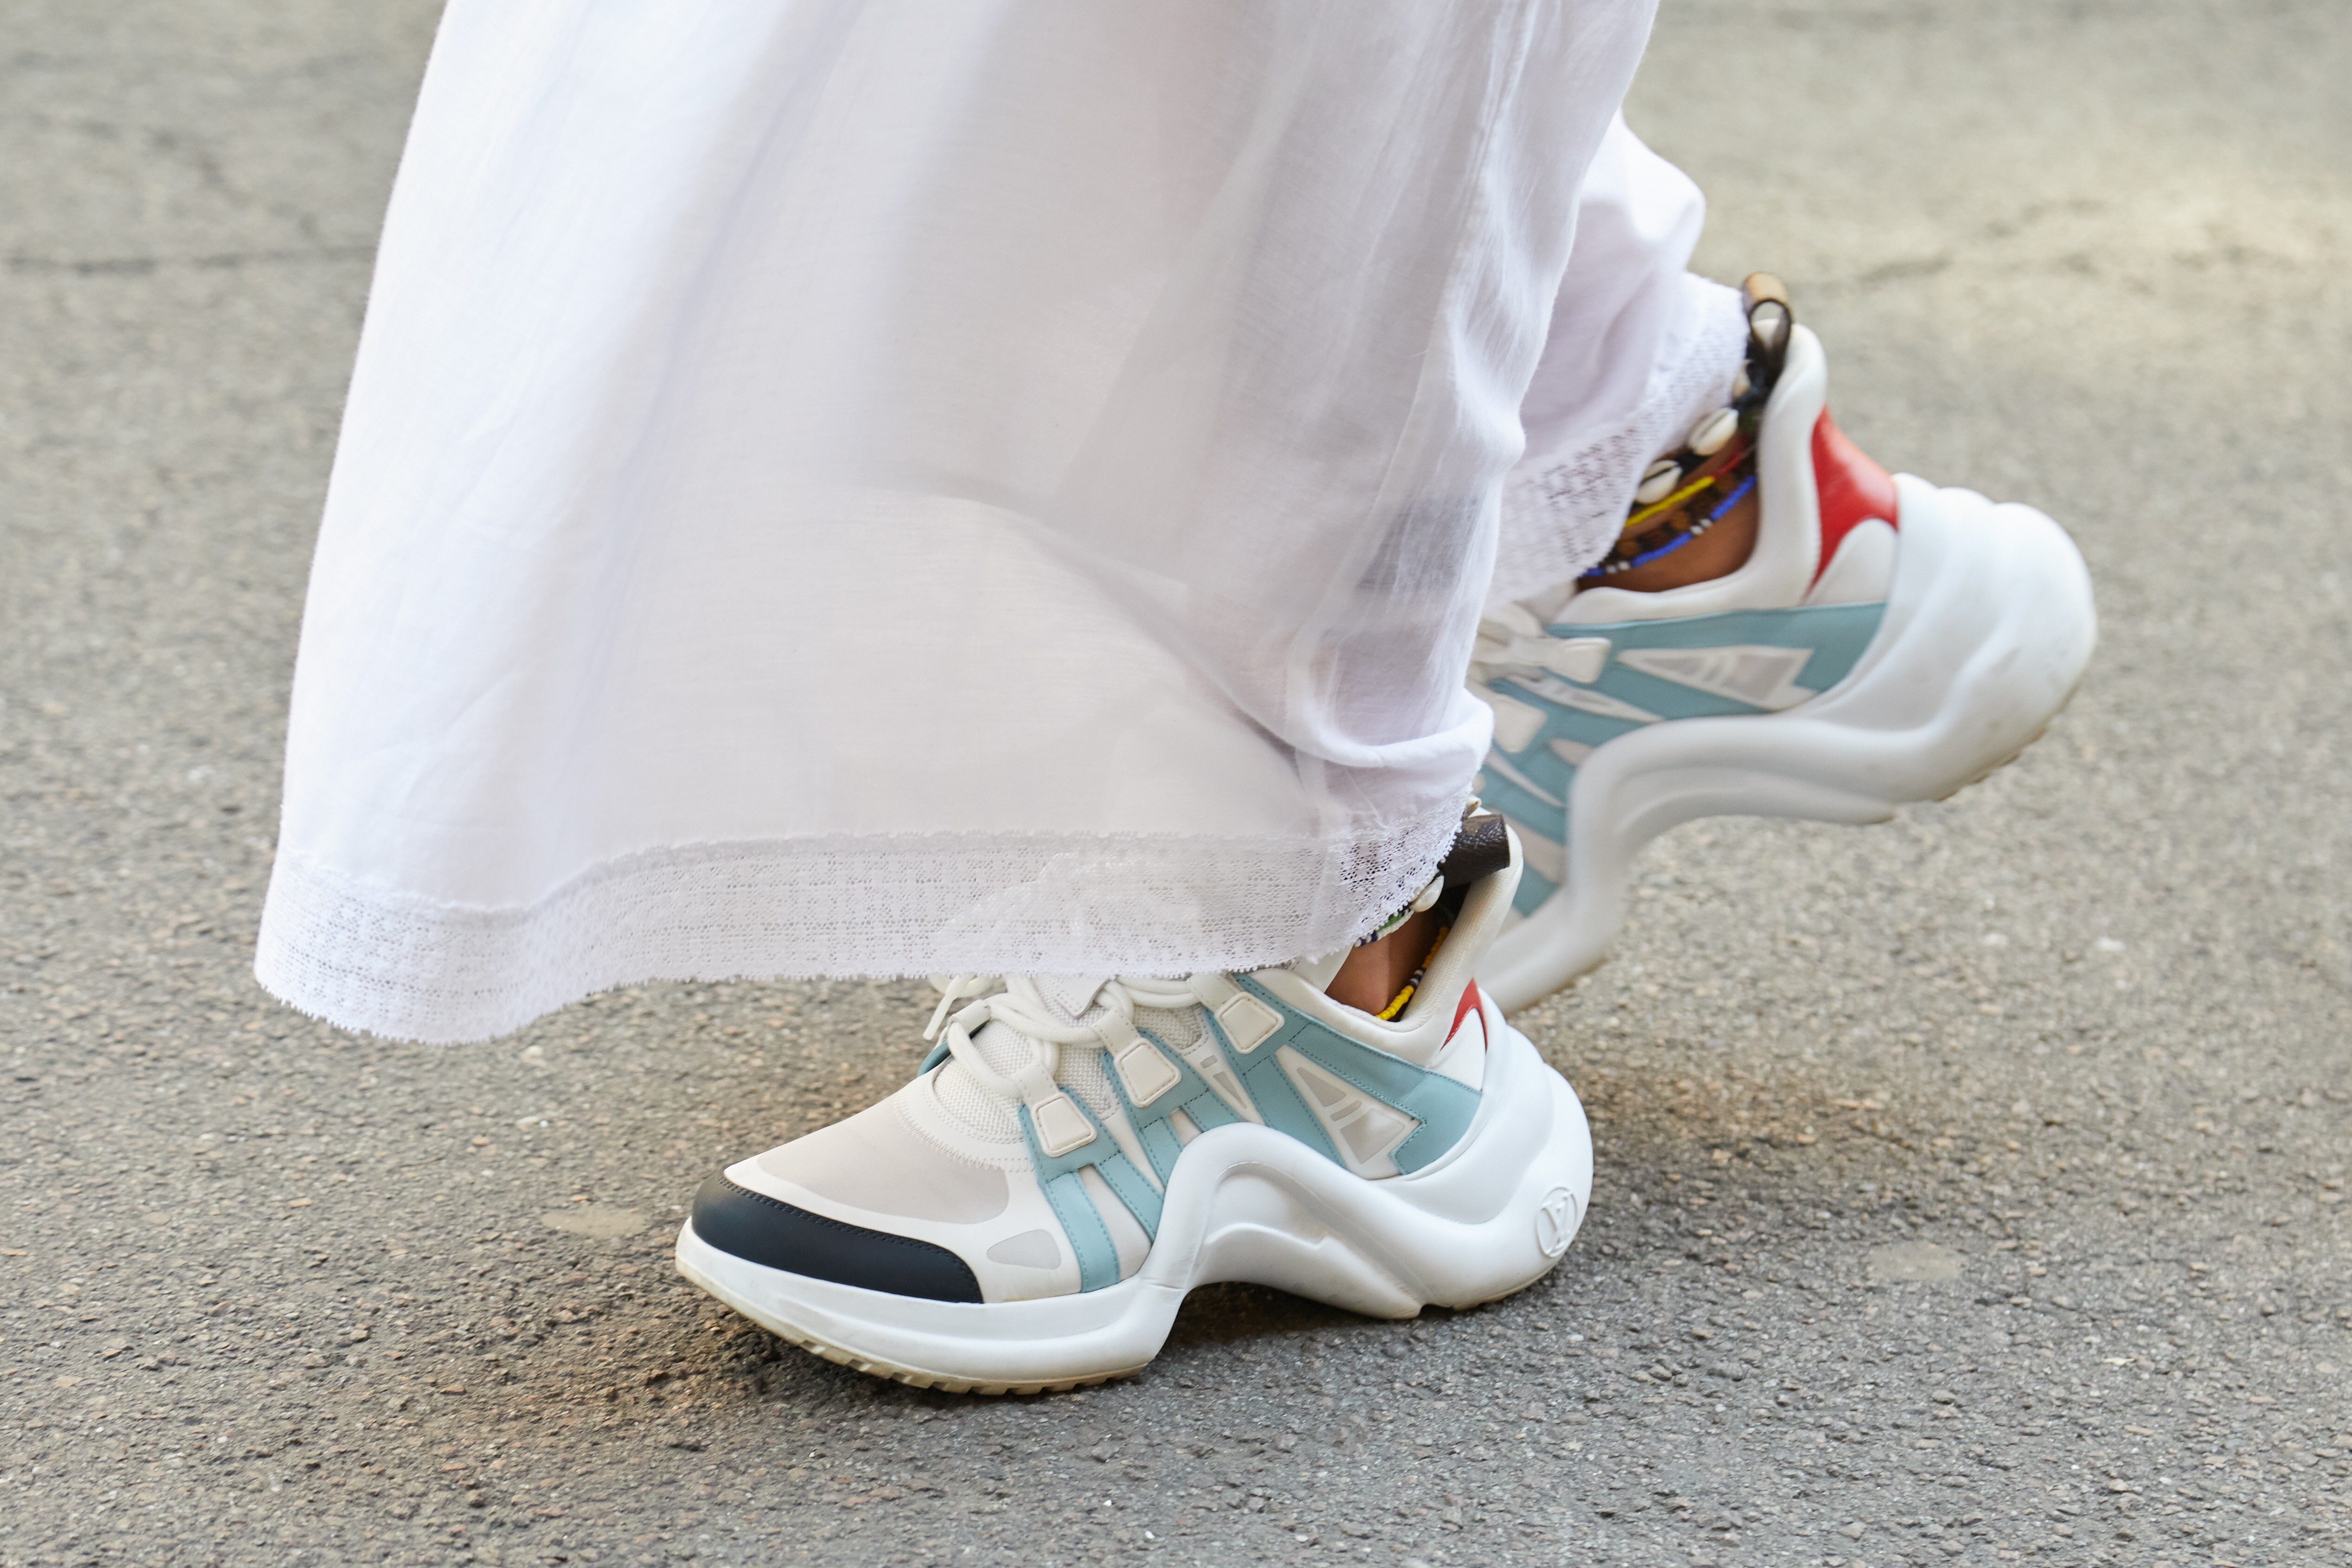 A pair of white and blue Louis Vuitton sneakers worn during Milan Fashion Week in 2018. Designers are increasingly pivoting to creating and selling sneakers as footwear trends move towards casual wear. Photo: Shutterstock